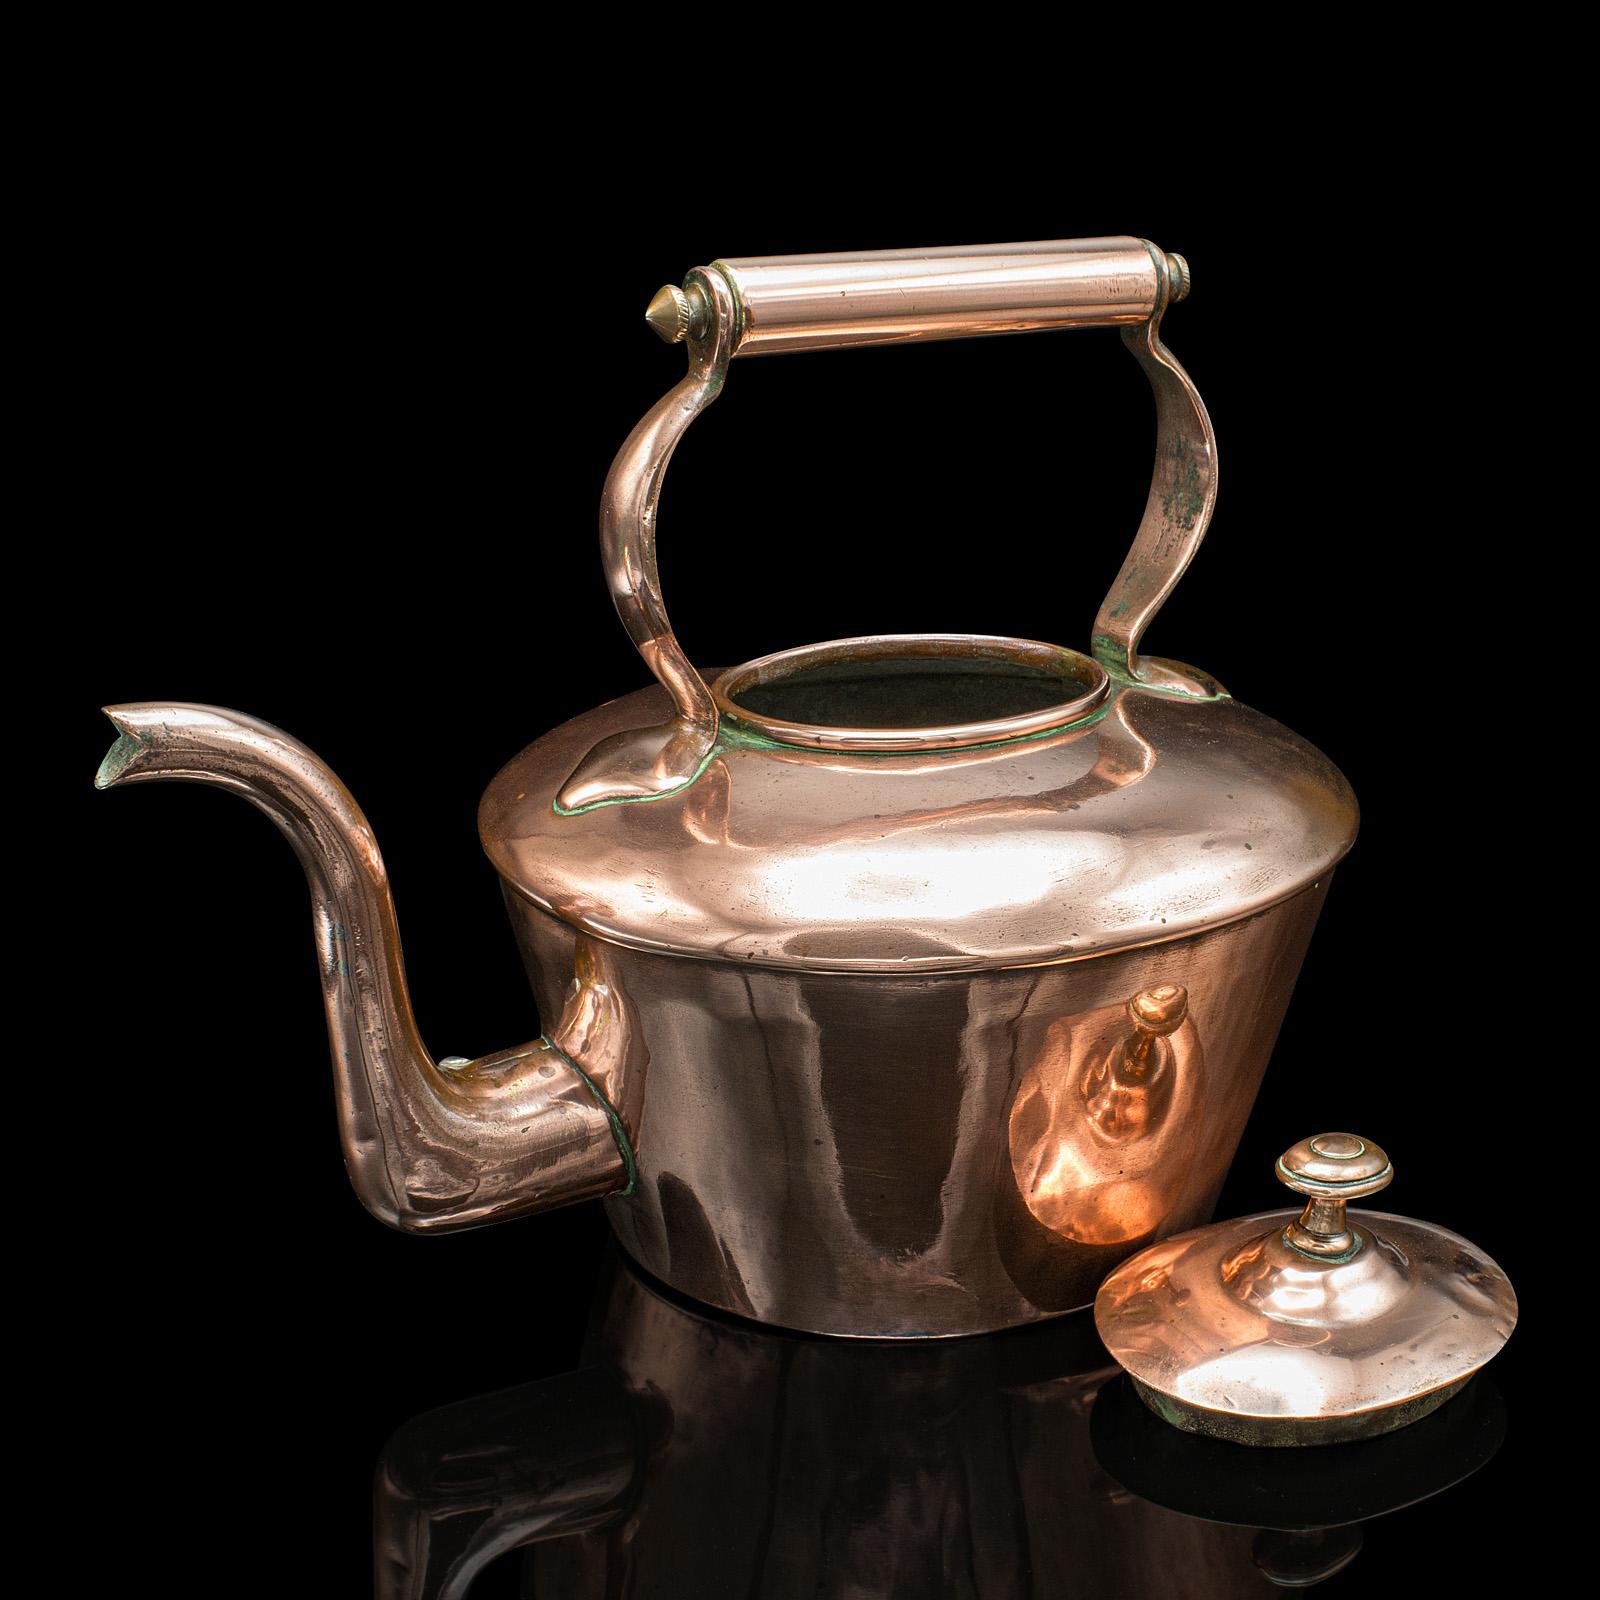 
This is an antique scullery kettle. An English, copper stovetop teapot, dating to the Victorian period, circa 1870.

Charming example with an attractive colour and polished finish
Displays a desirable aged patina and in good original order
Quality